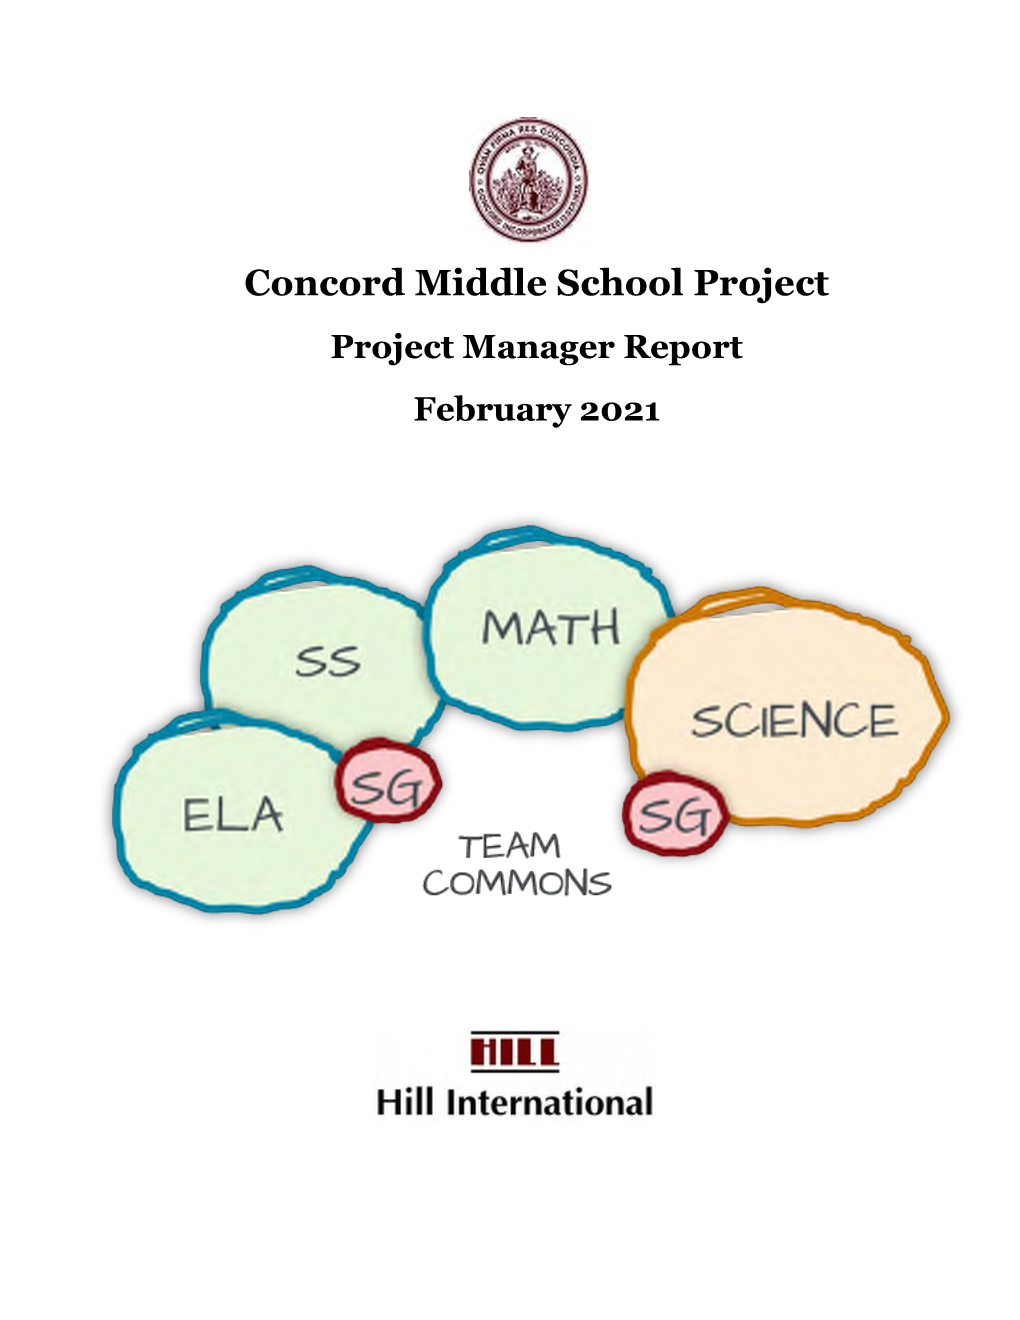 Concord Middle School Project Project Manager Report February 2021